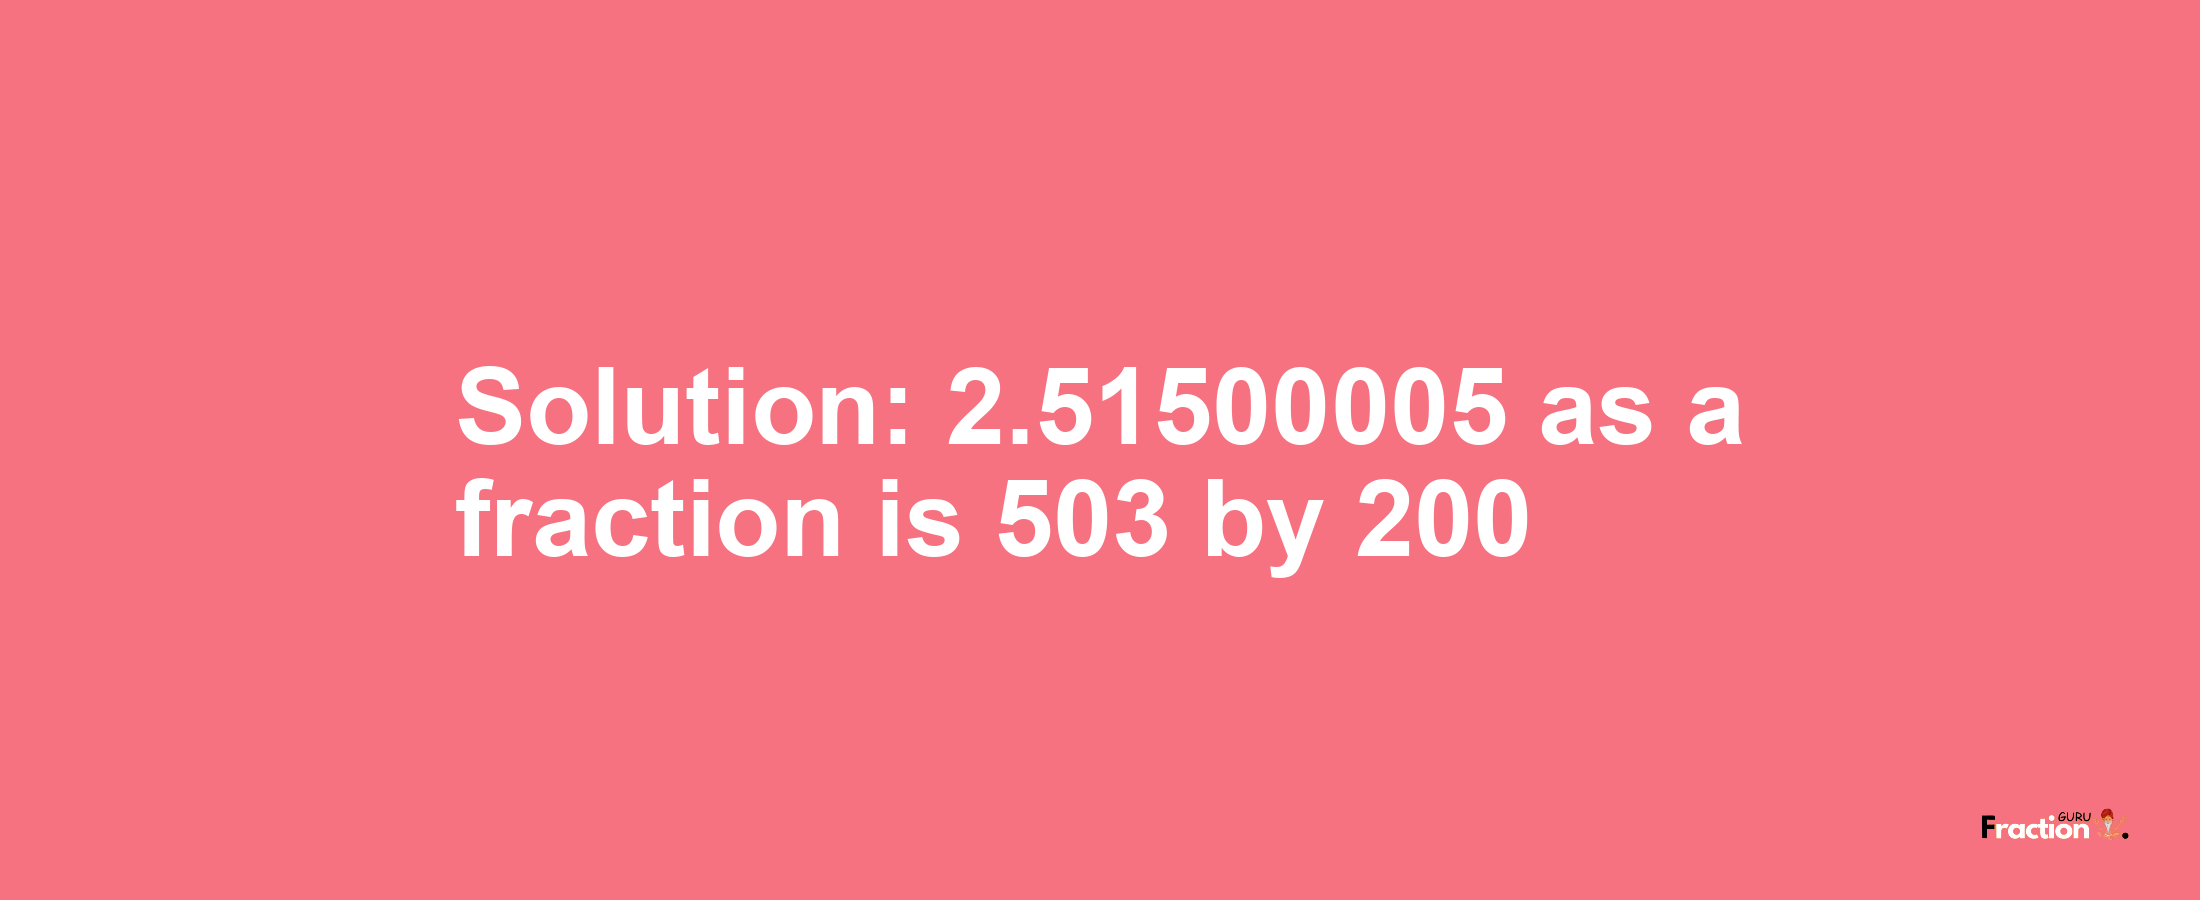 Solution:2.51500005 as a fraction is 503/200